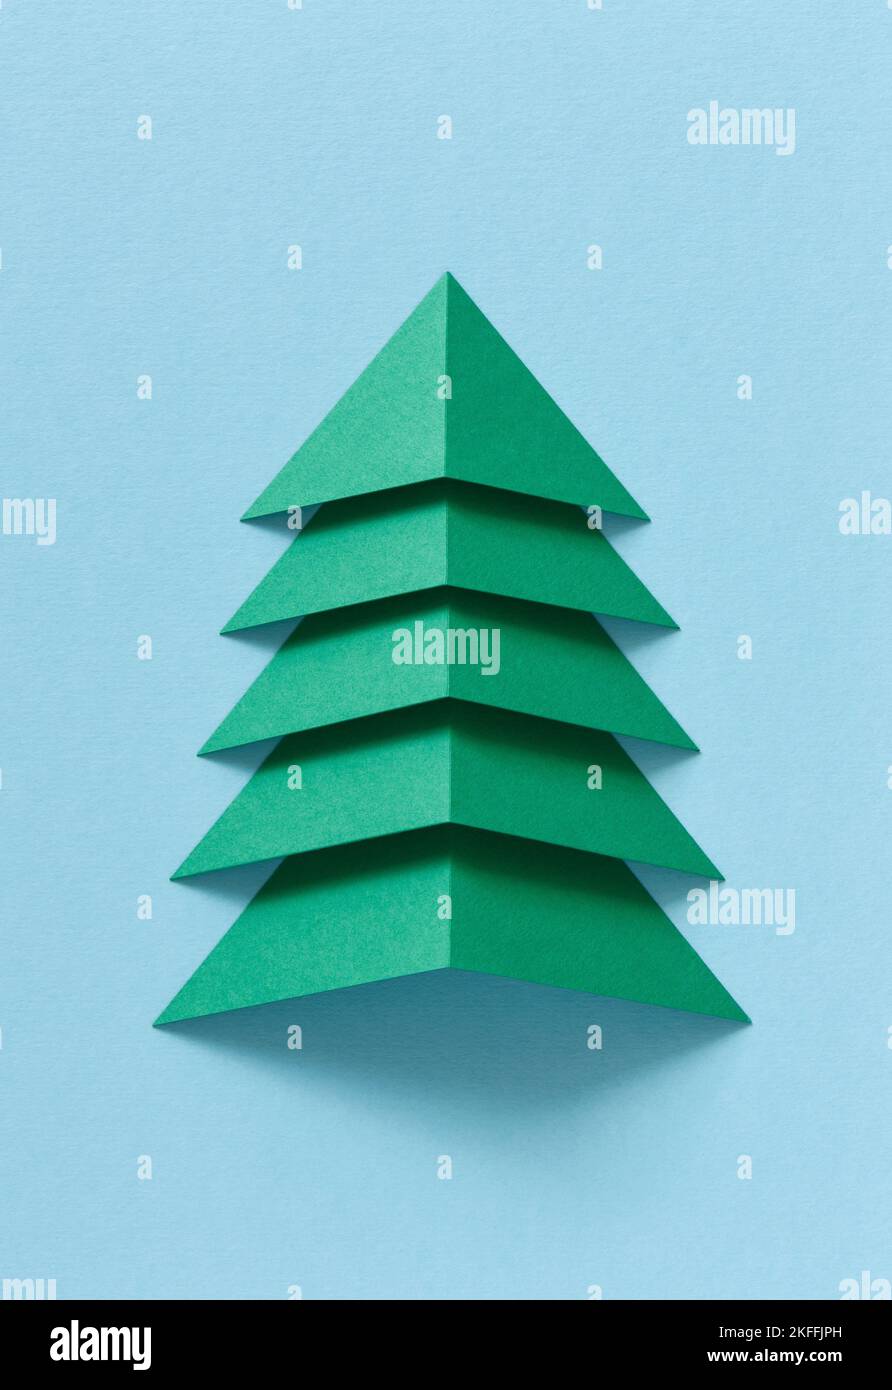 Christmas tree shape made from paper Stock Photo